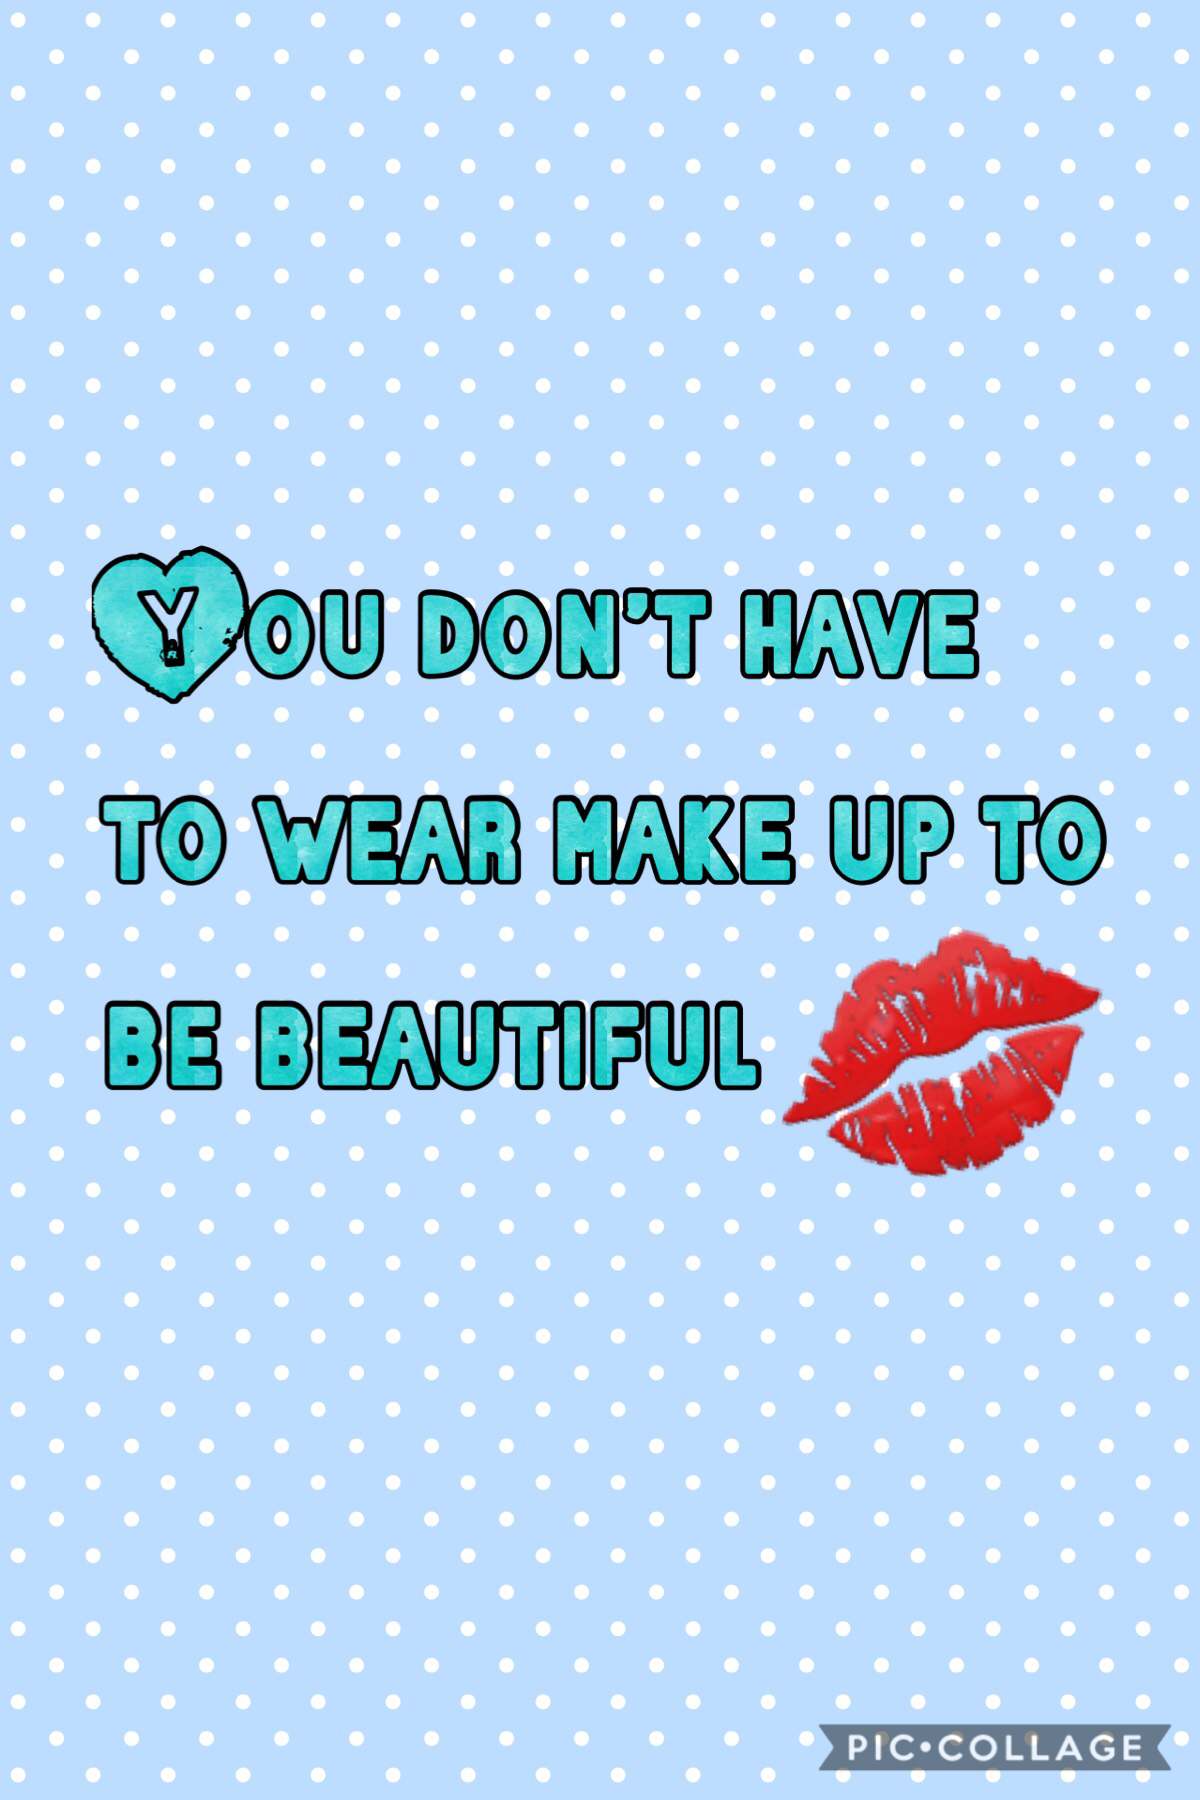 It’s true you don’t have to wear make up to look beautiful all you need is a smile